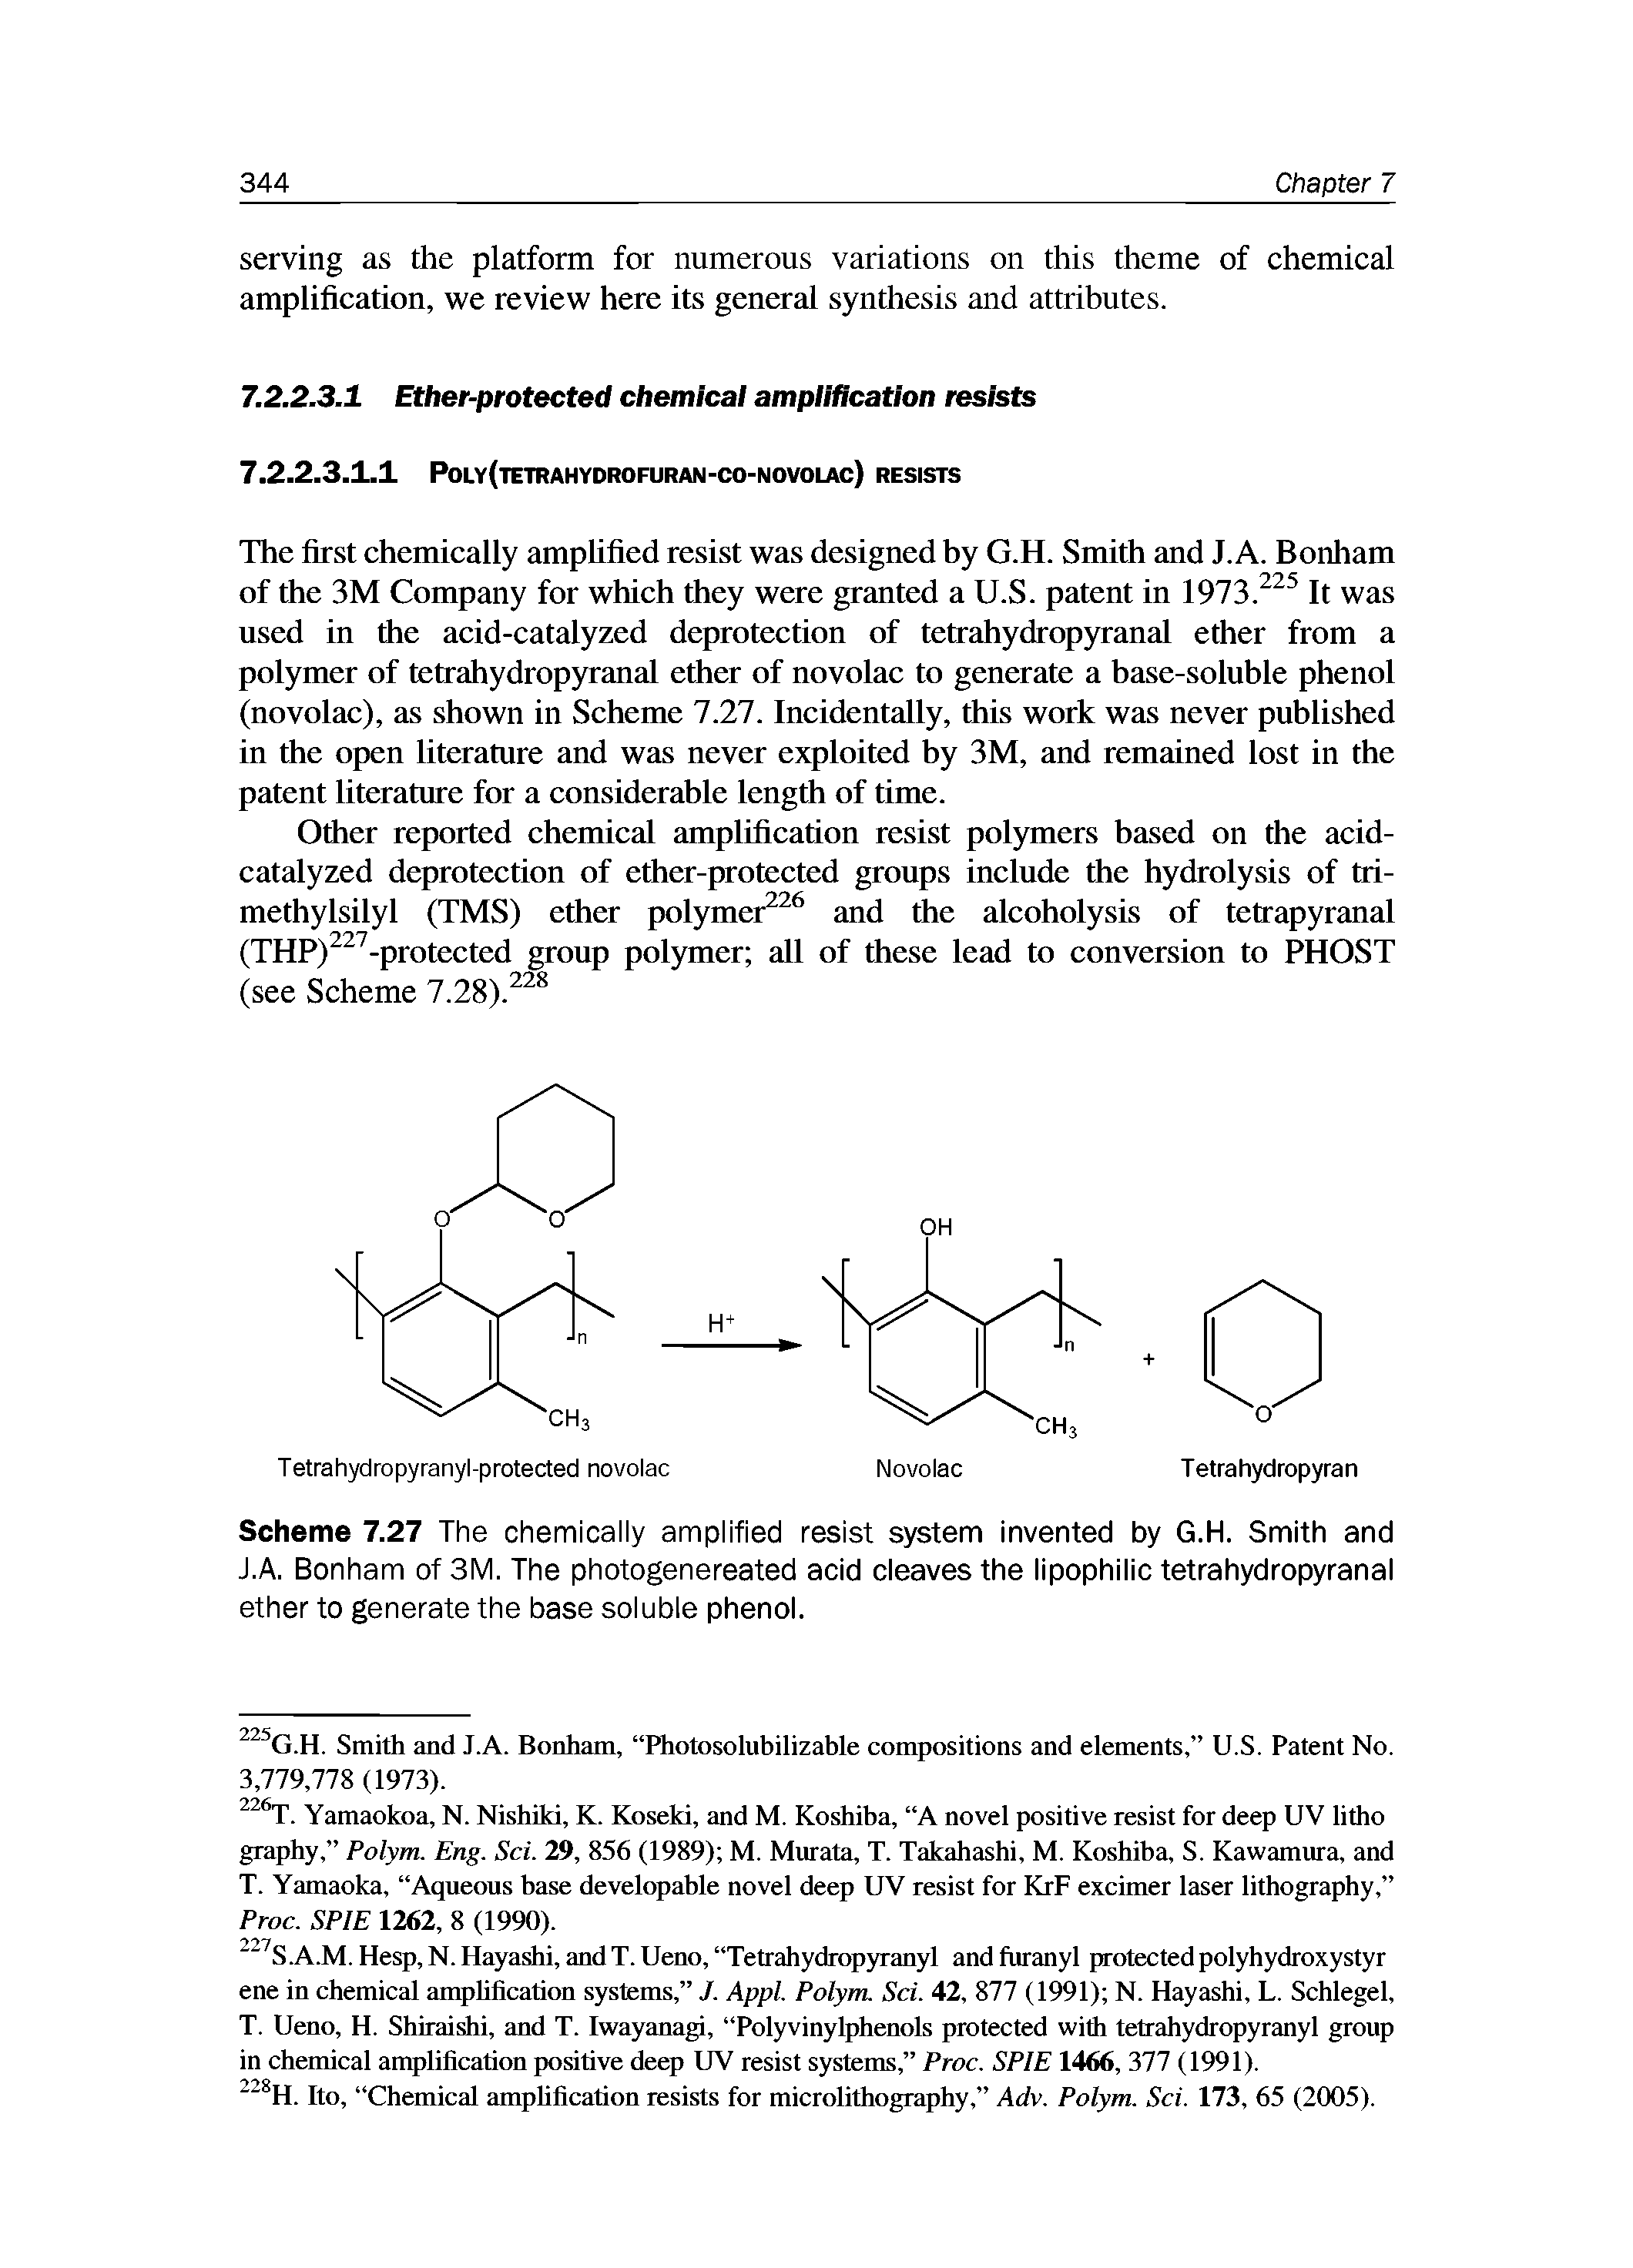 Scheme 7.27 The chemically amplified resist system invented by G.H. Smith and J.A. Bonham of 3M. The photogenereated acid cleaves the lipophilic tetrahydropyranal ether to generate the base soluble phenol.